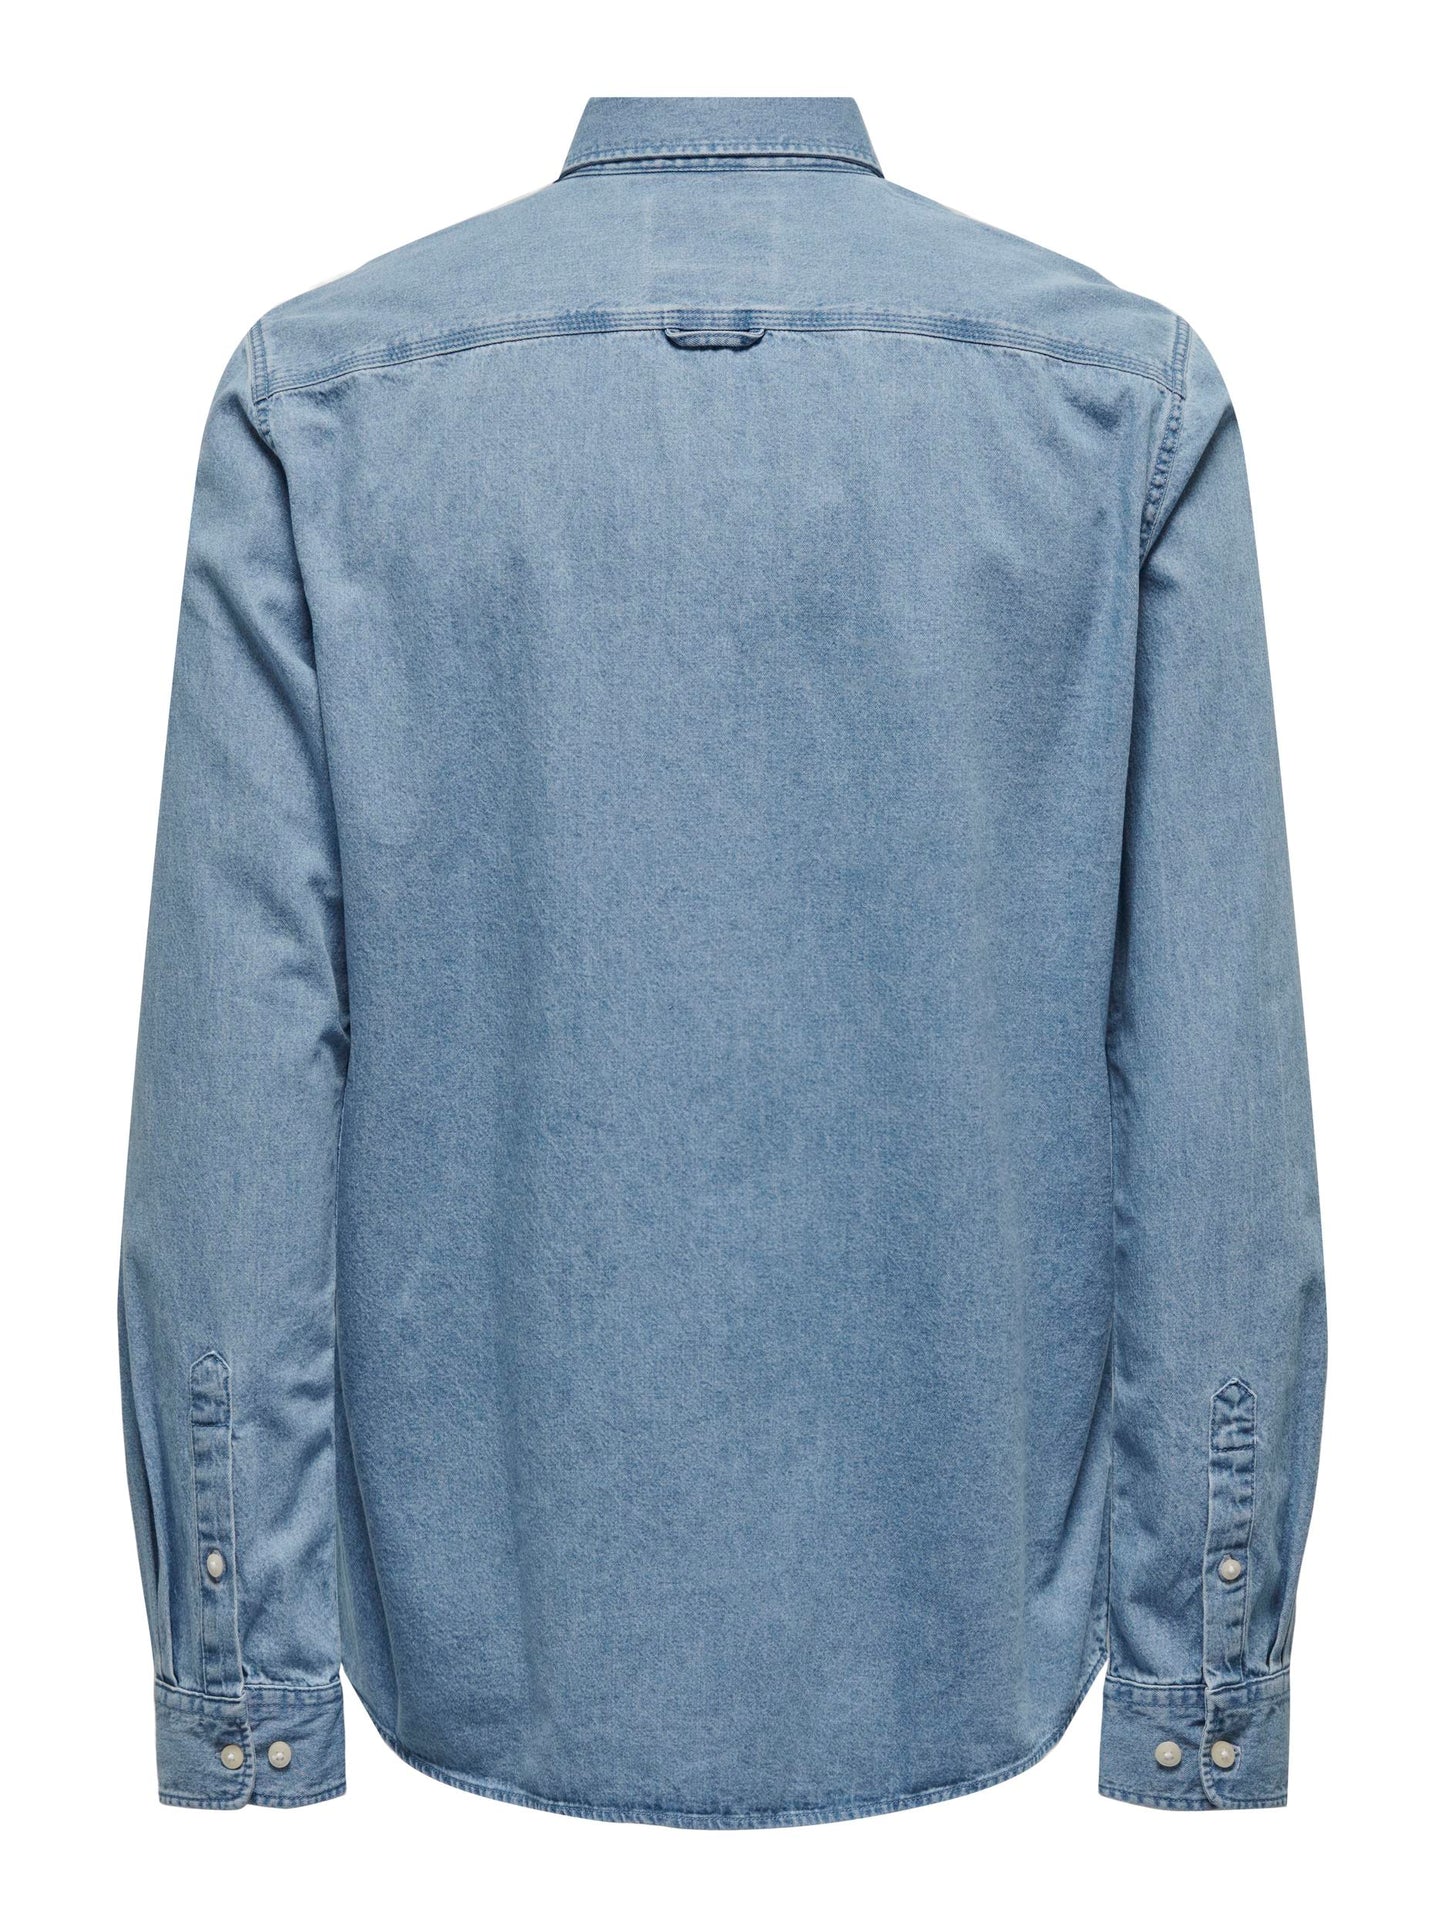 m tops - ONLY&SONS - Day Button Down Chambray Shirt - PLENTY